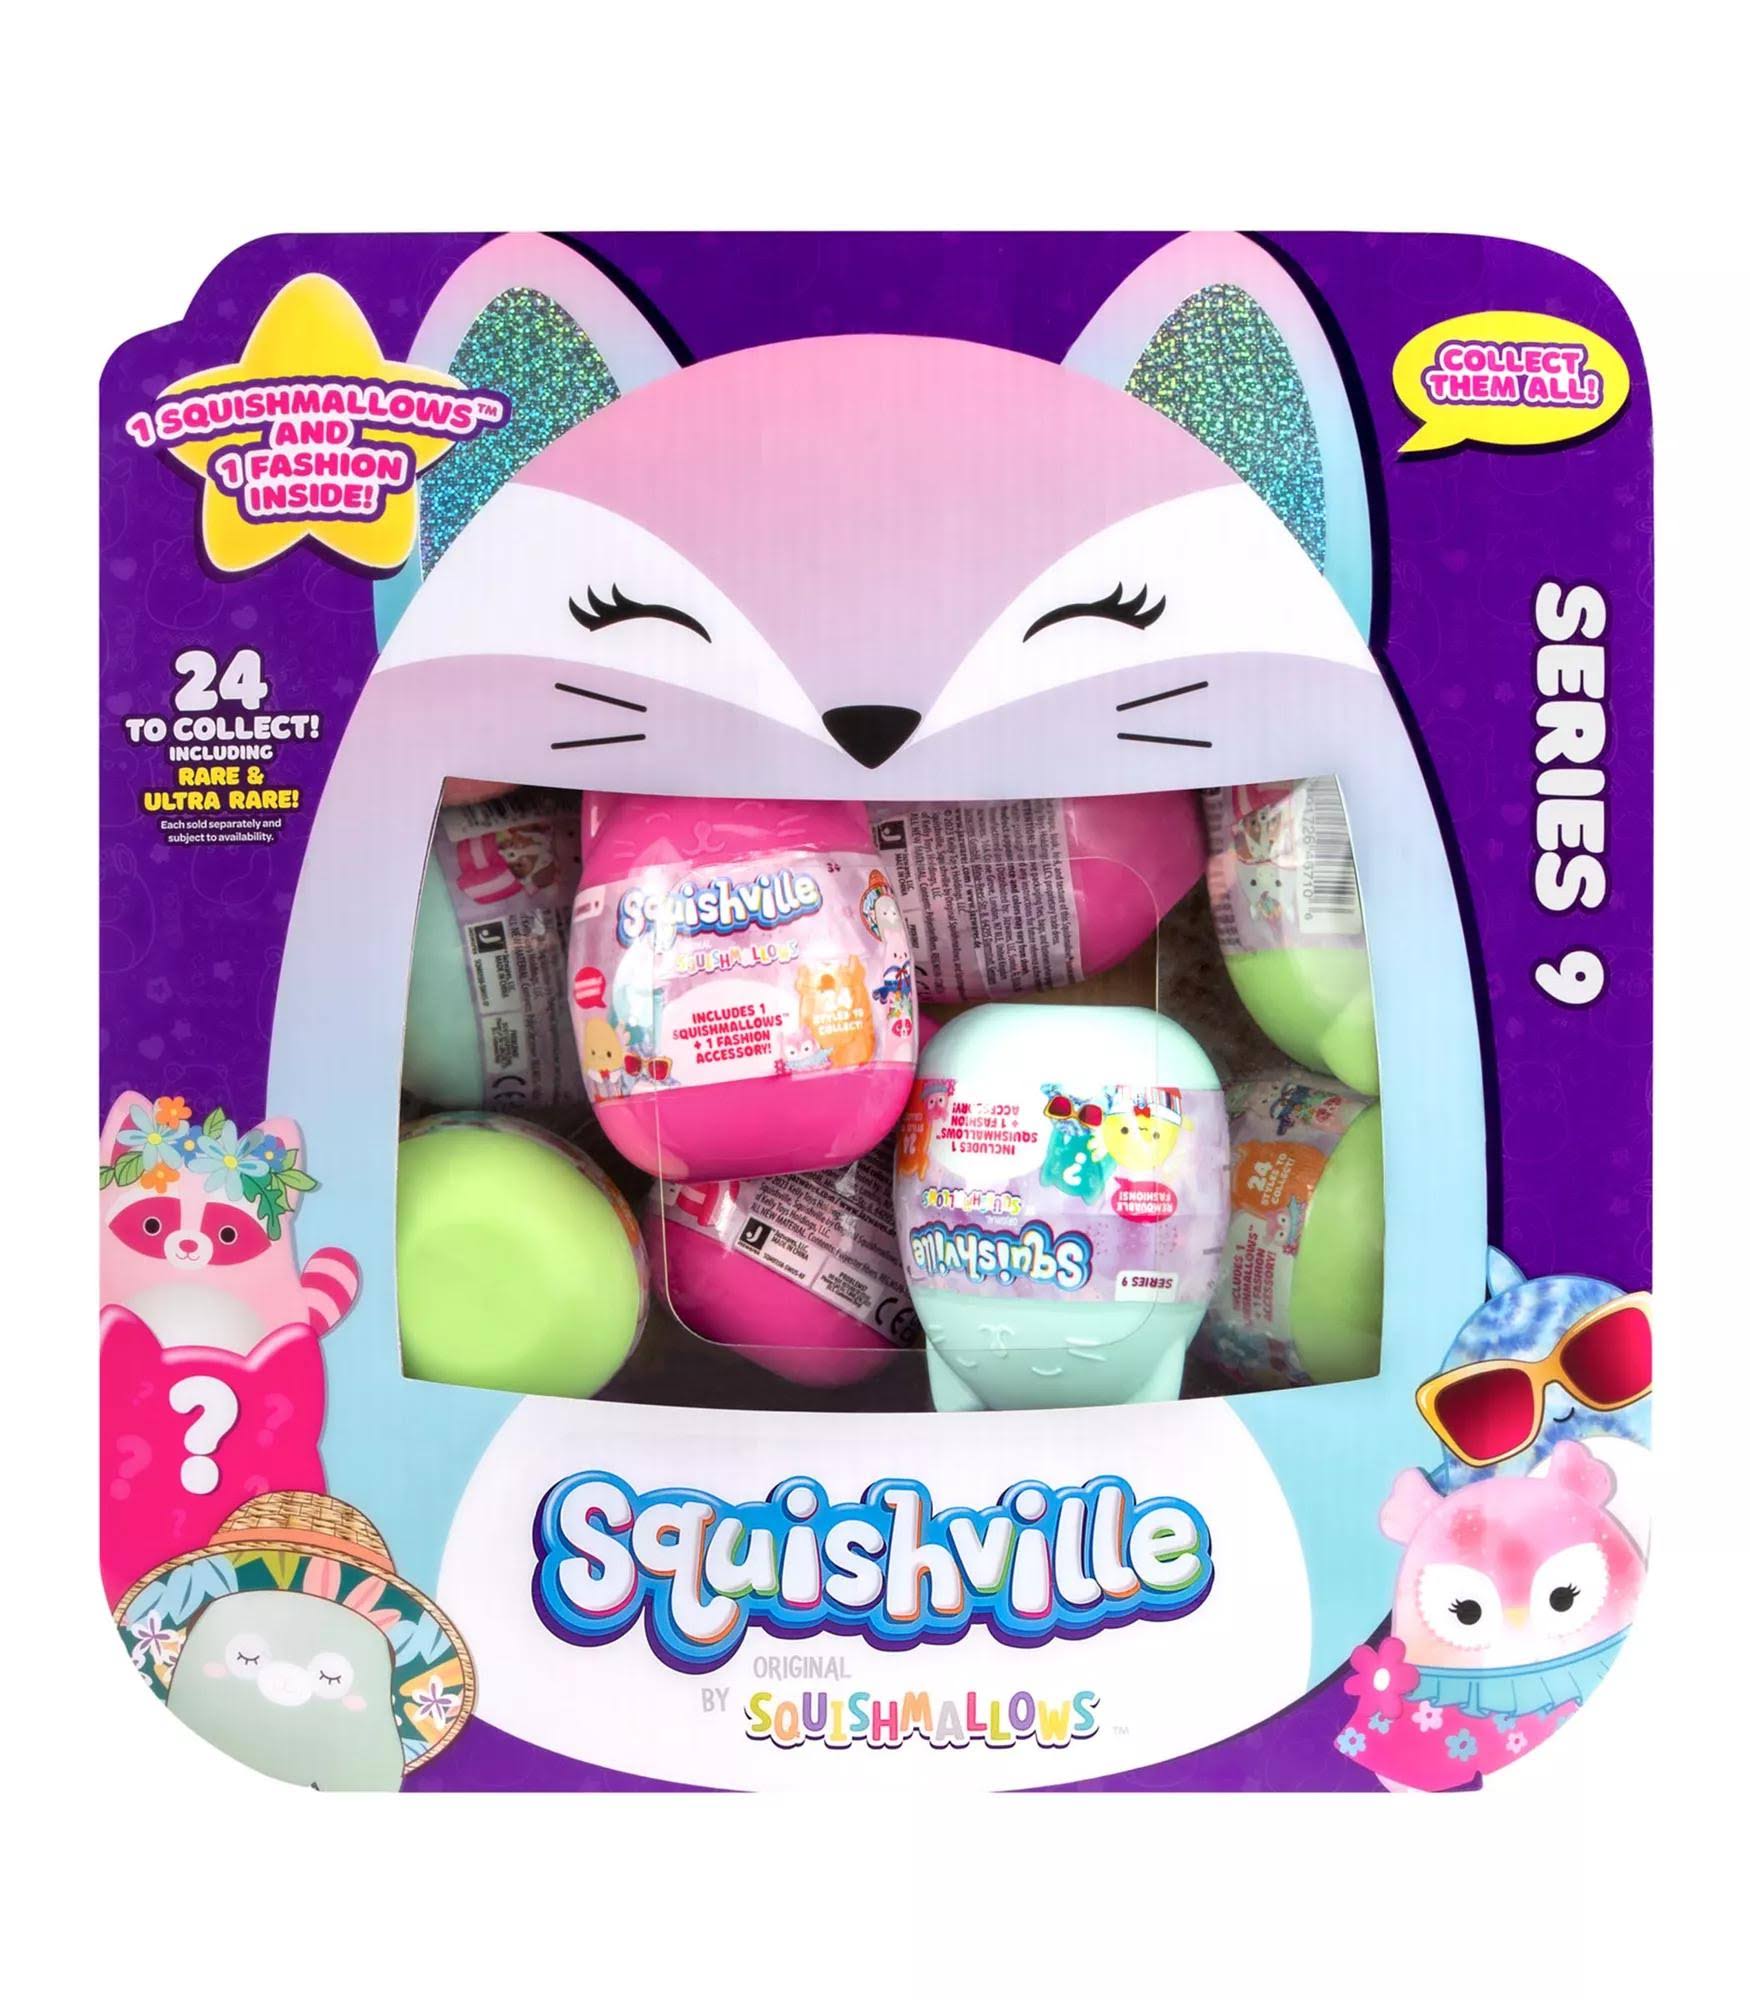 Squishmallow Squishville Mystery Mini Series 1 Plush Assortment Blind Package - 1 Blind Pack